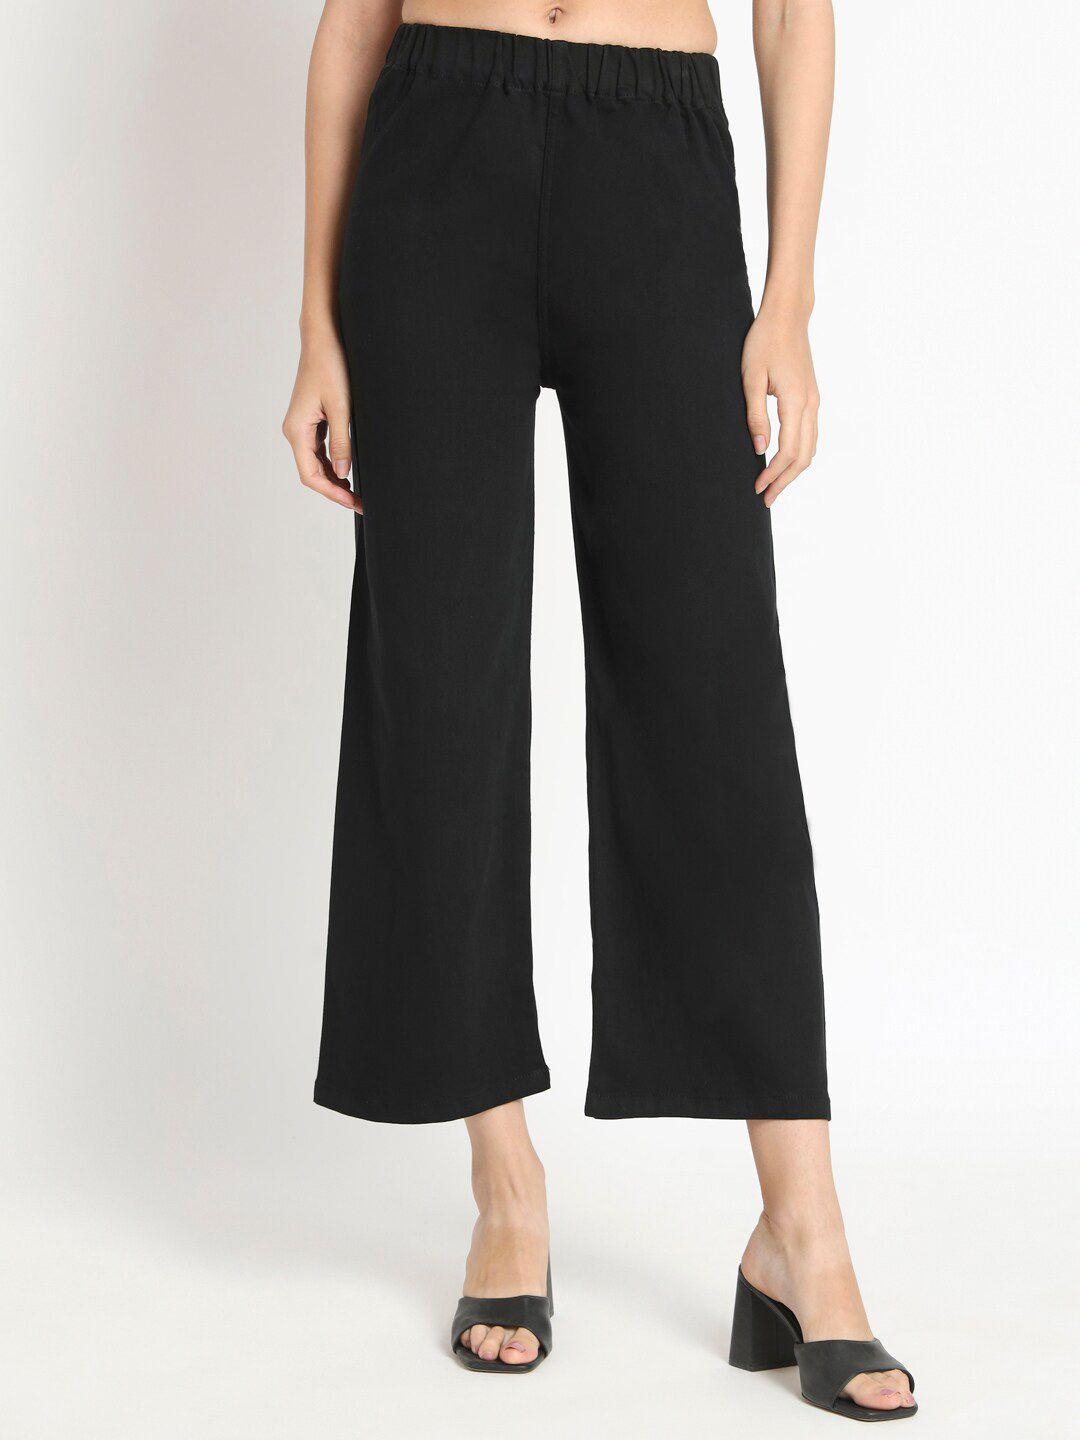 angelfab women mid-rise parallel trousers